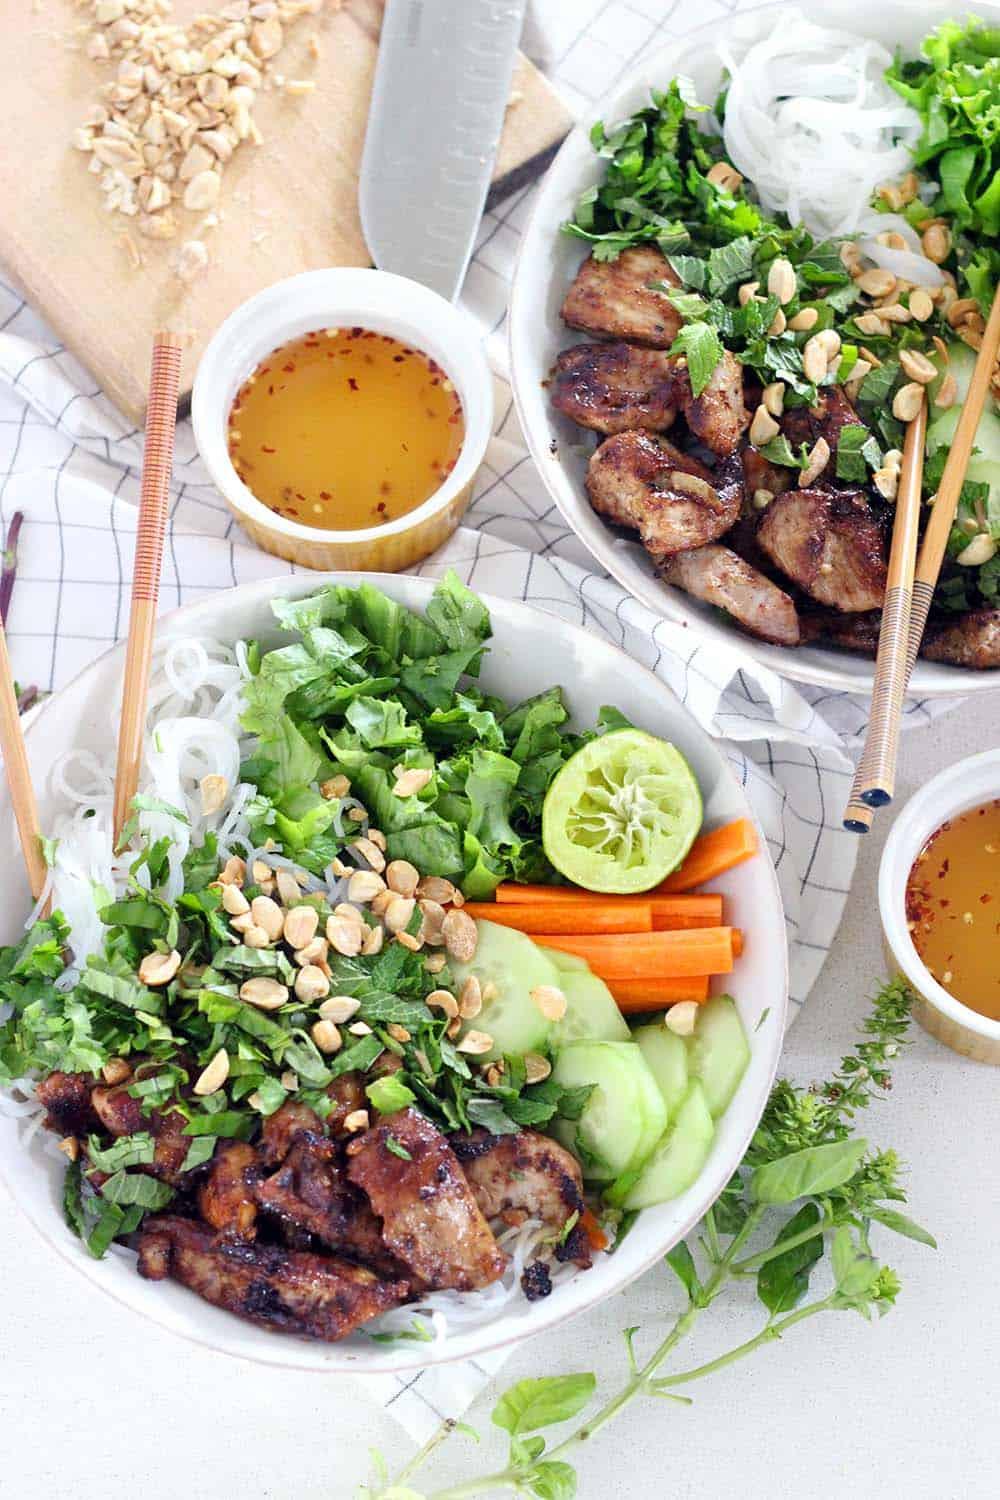 This recipe for Vietnamese Pork Bún Bowls uses a few shortcuts to make it quick and easy without sacrificing flavor. It